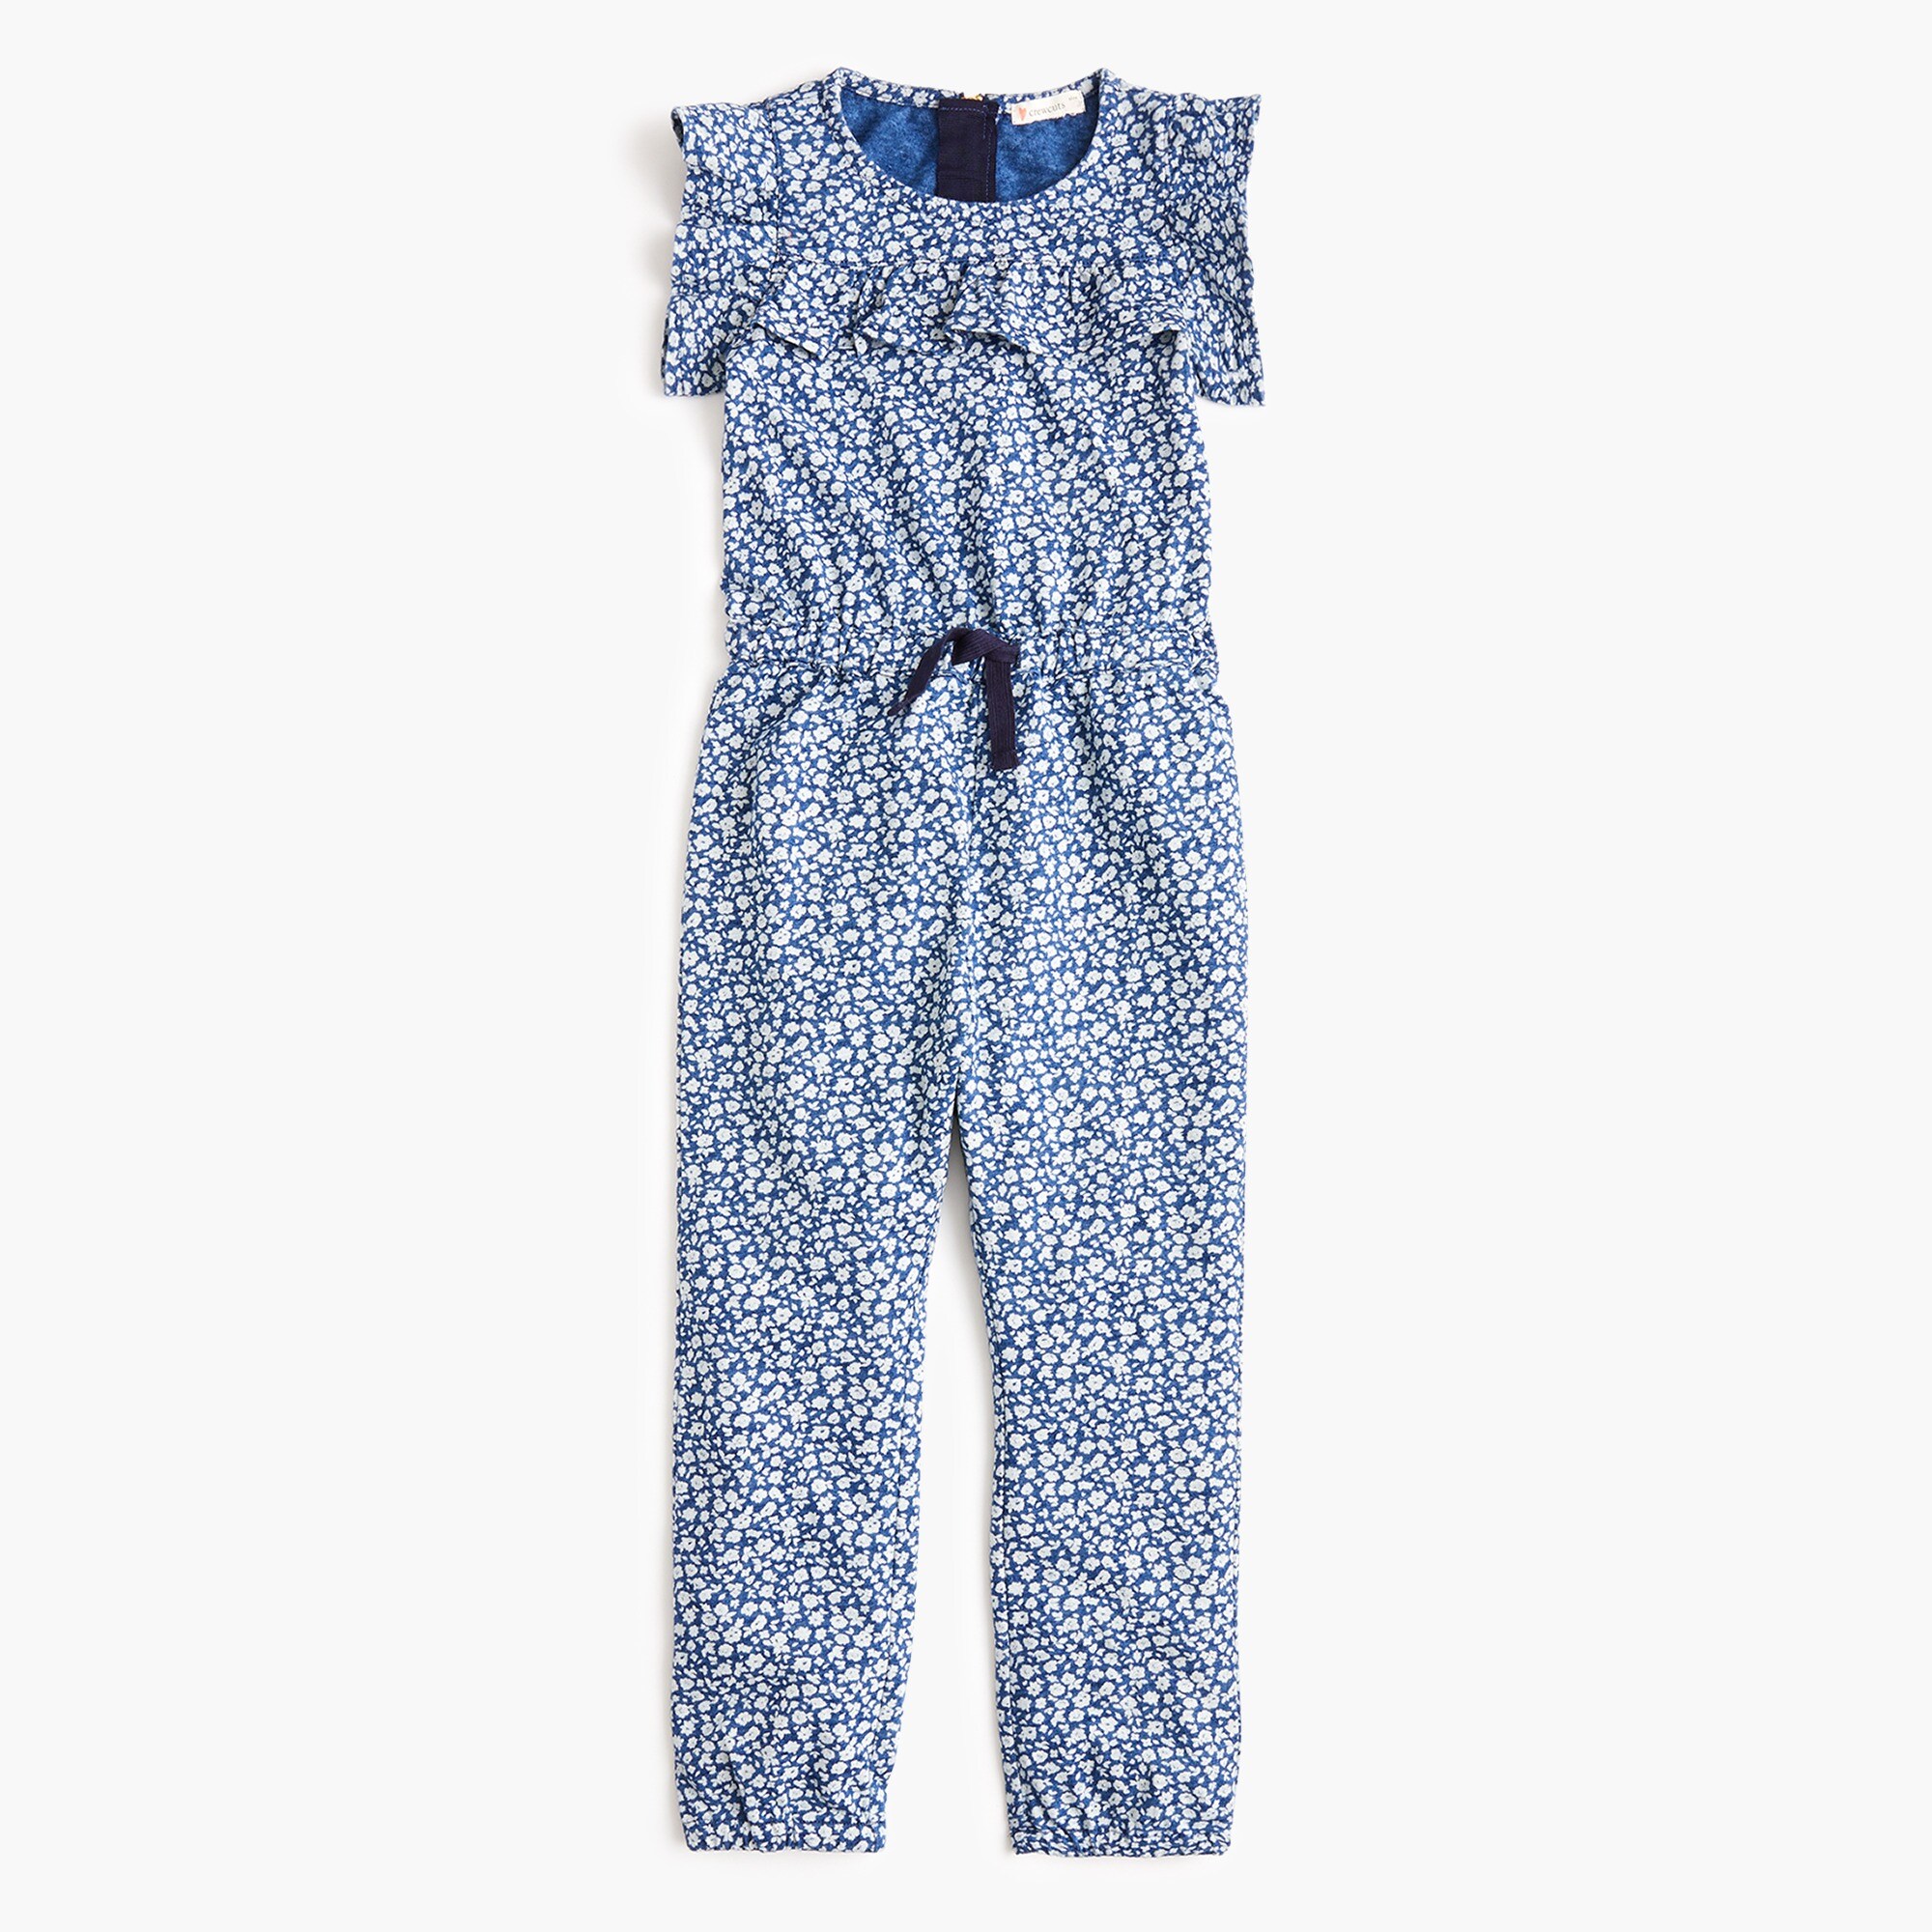 Jcrew Girls’ ruffle-trimmed jumpsuit in floral chambray